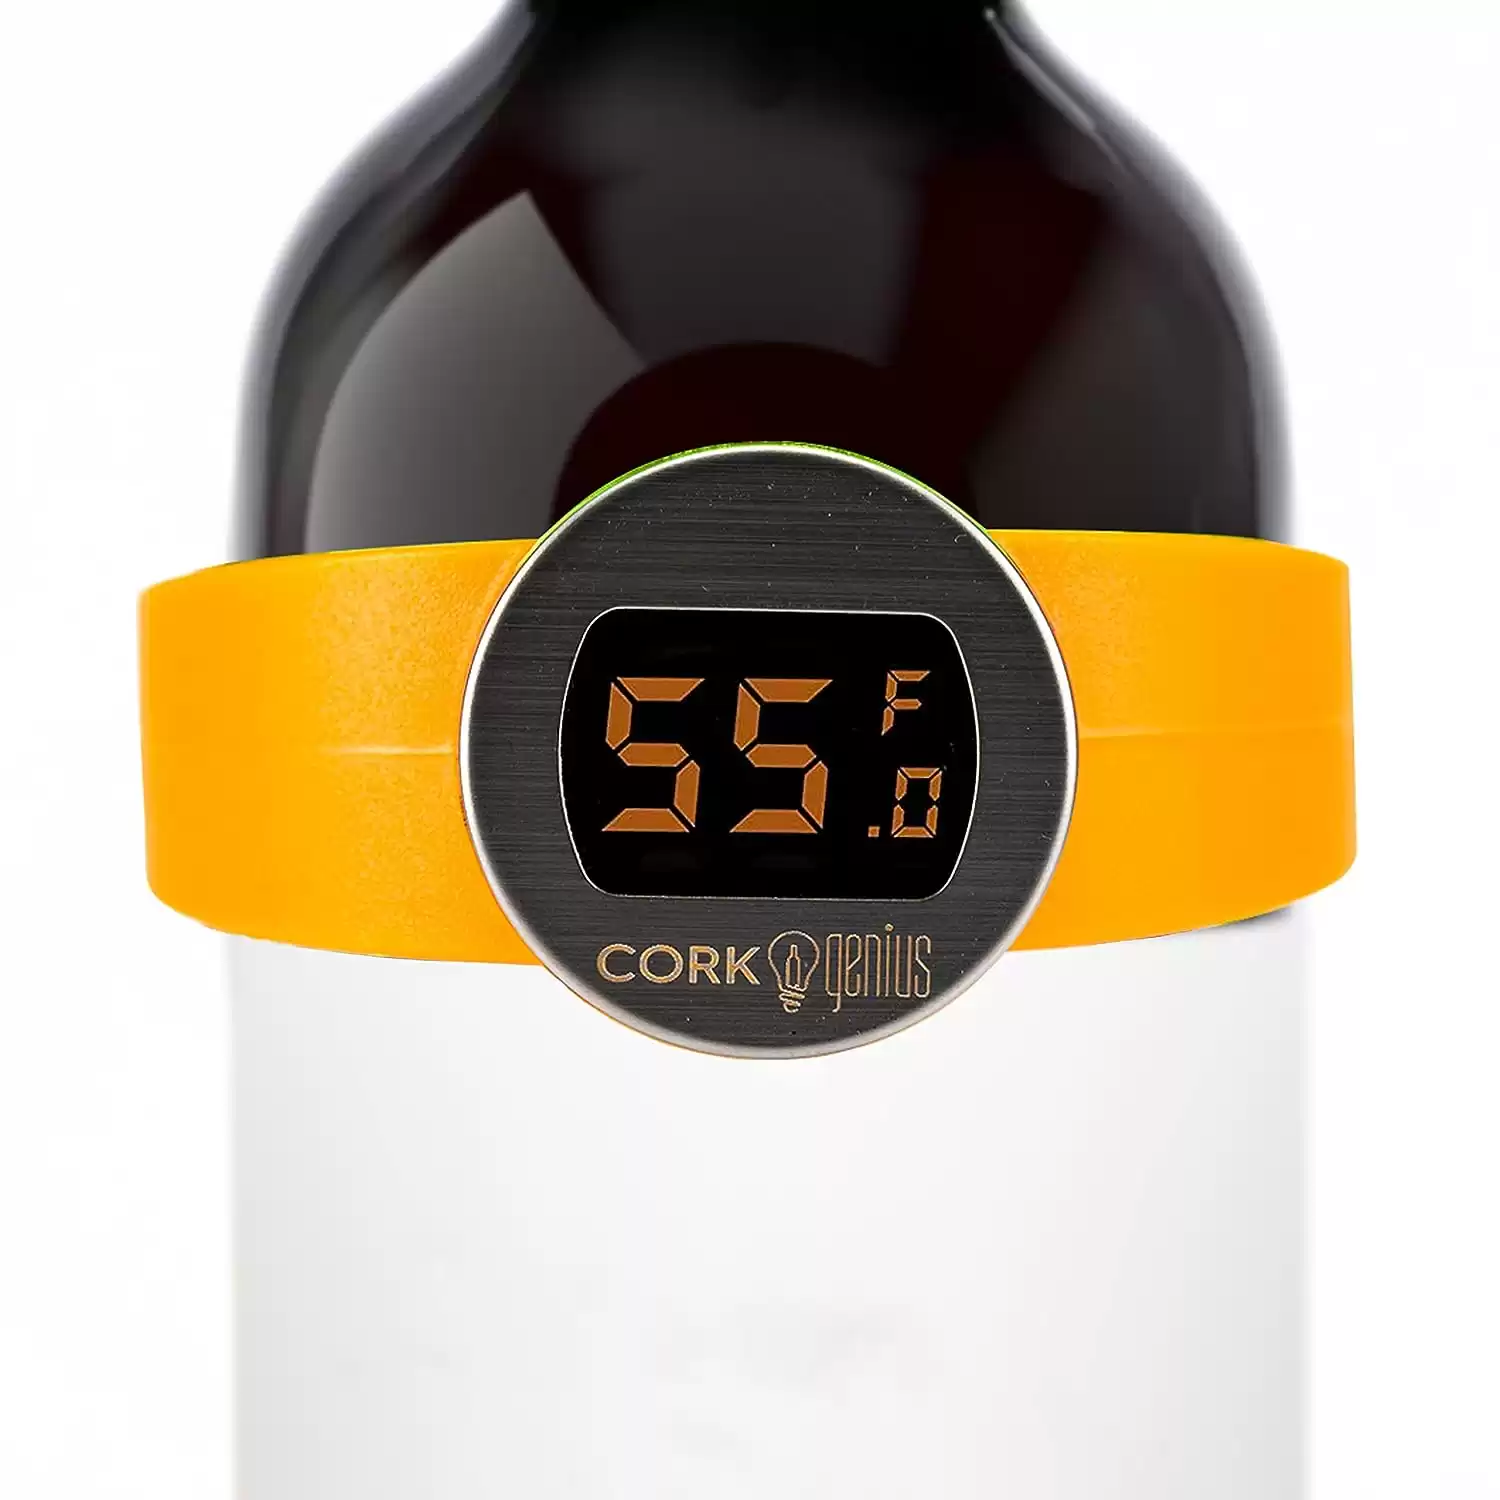 Cork Genius Wine Bottle Digital Thermometer with LCD